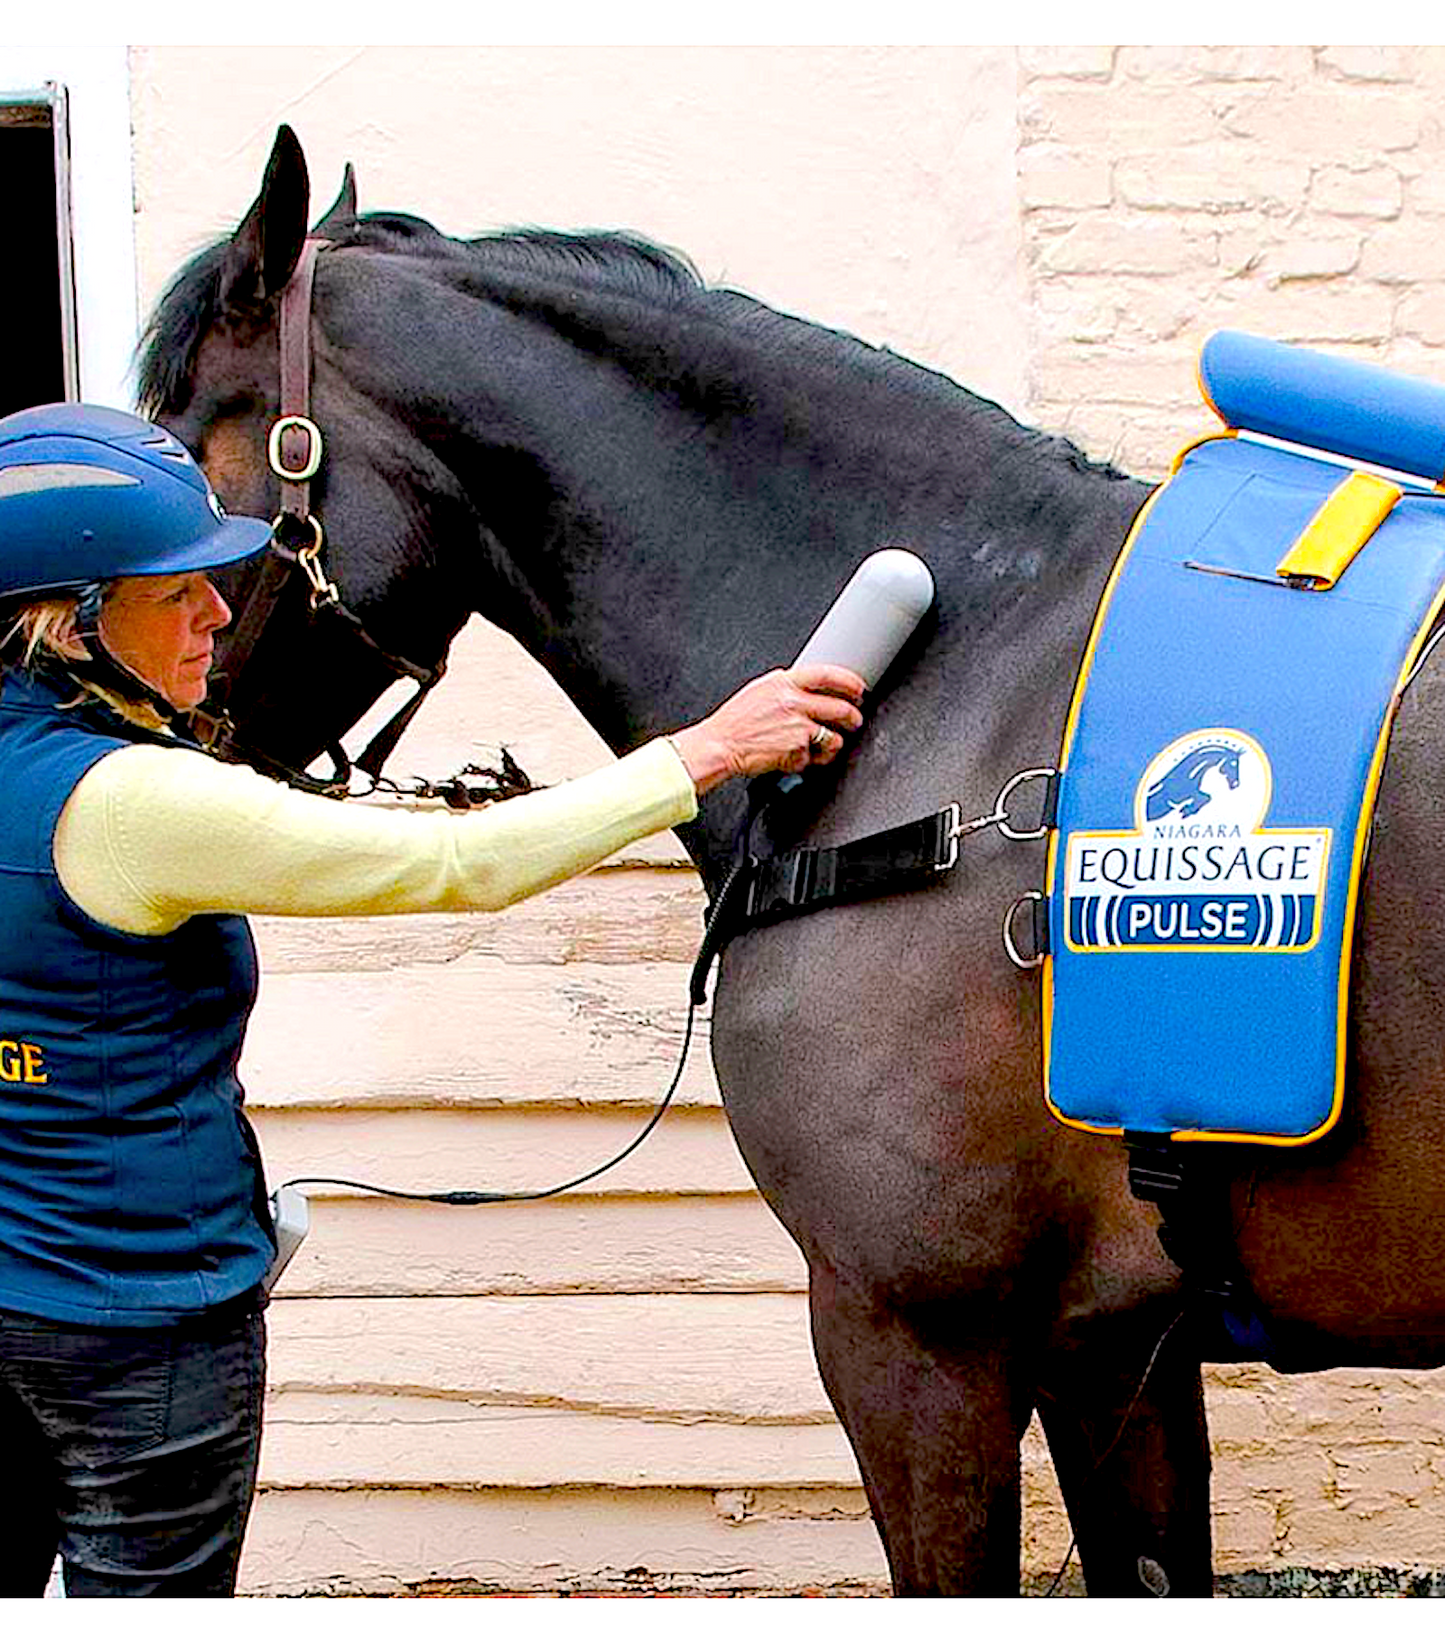 EQUISSAGE VIBRATION MASSAGE: cycloid massage therapy for equine athletes - Vital Vet